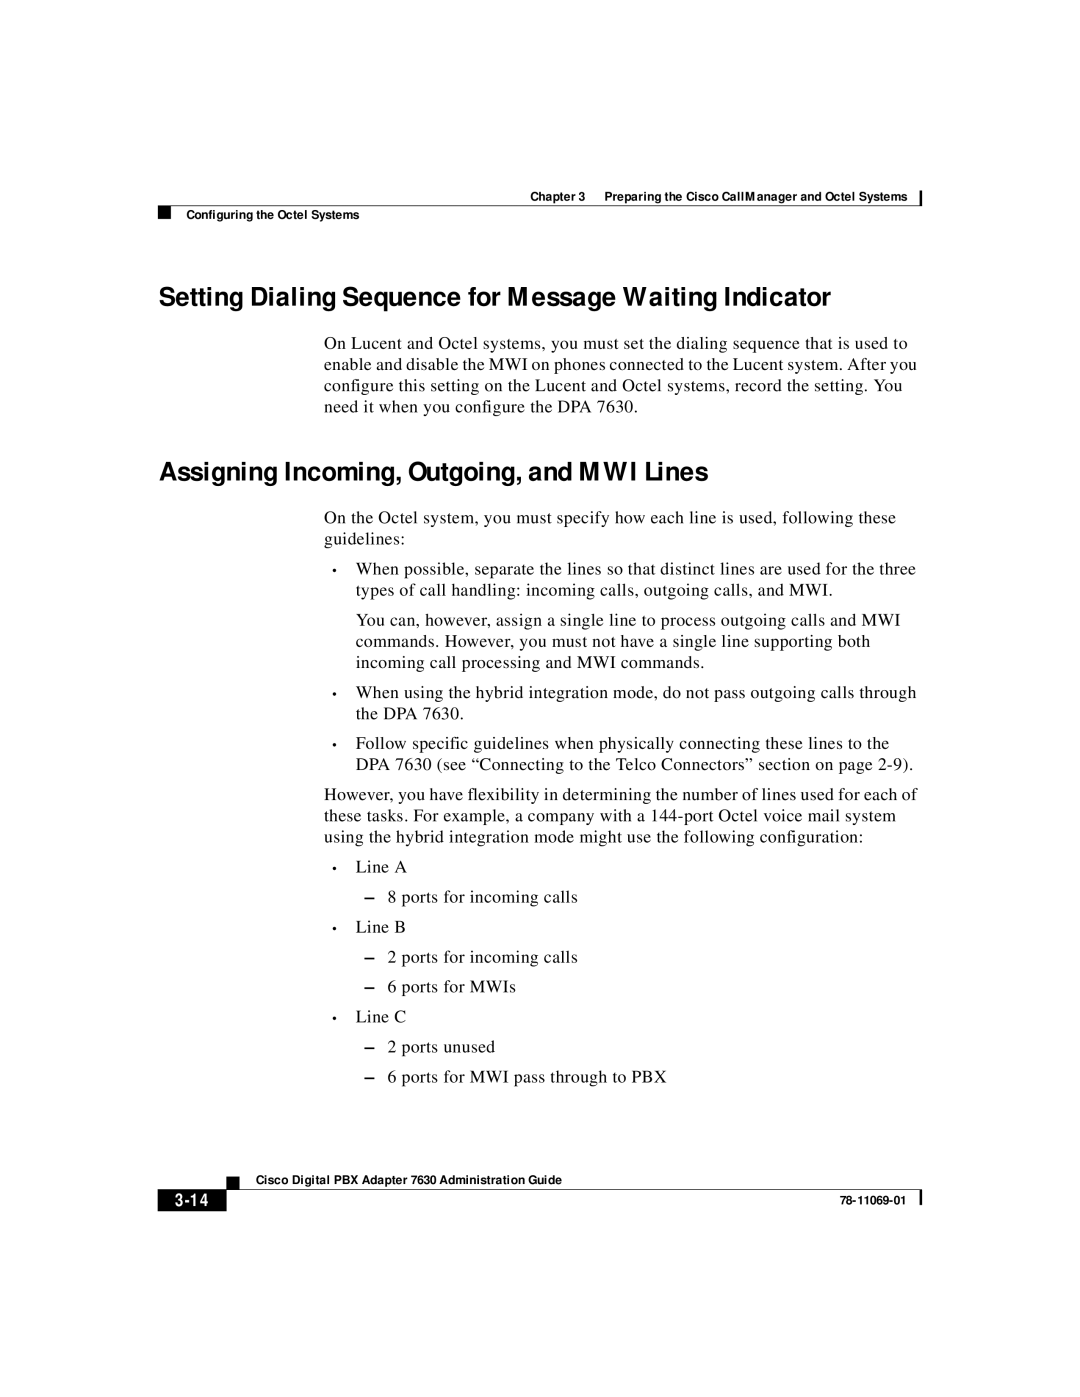 3Com 78-11069-01 Setting Dialing Sequence for Message Waiting Indicator, Assigning Incoming, Outgoing, and MWI Lines, 3-14 